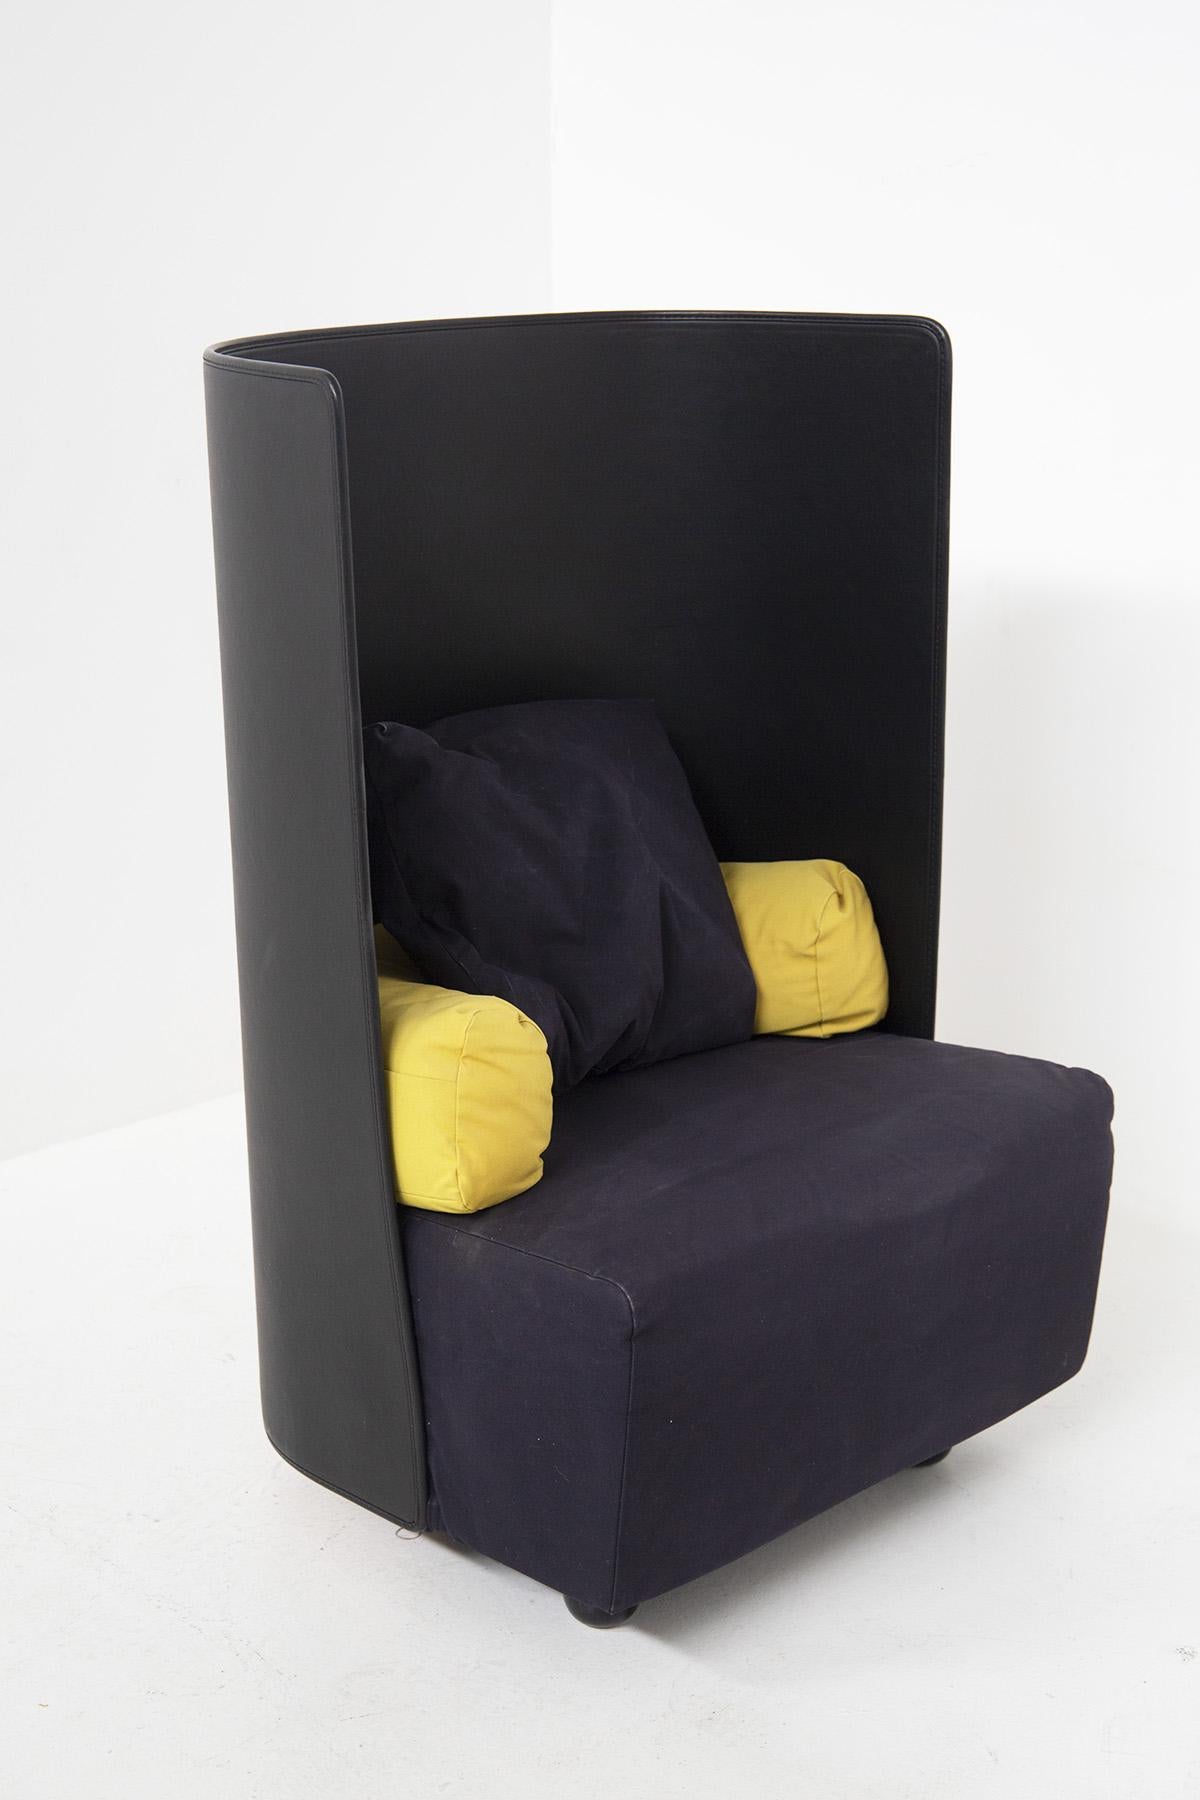 Mid-Century Modern De Pas, D'Urbino and Zanotta Black and Yellow Armchairs For Sale